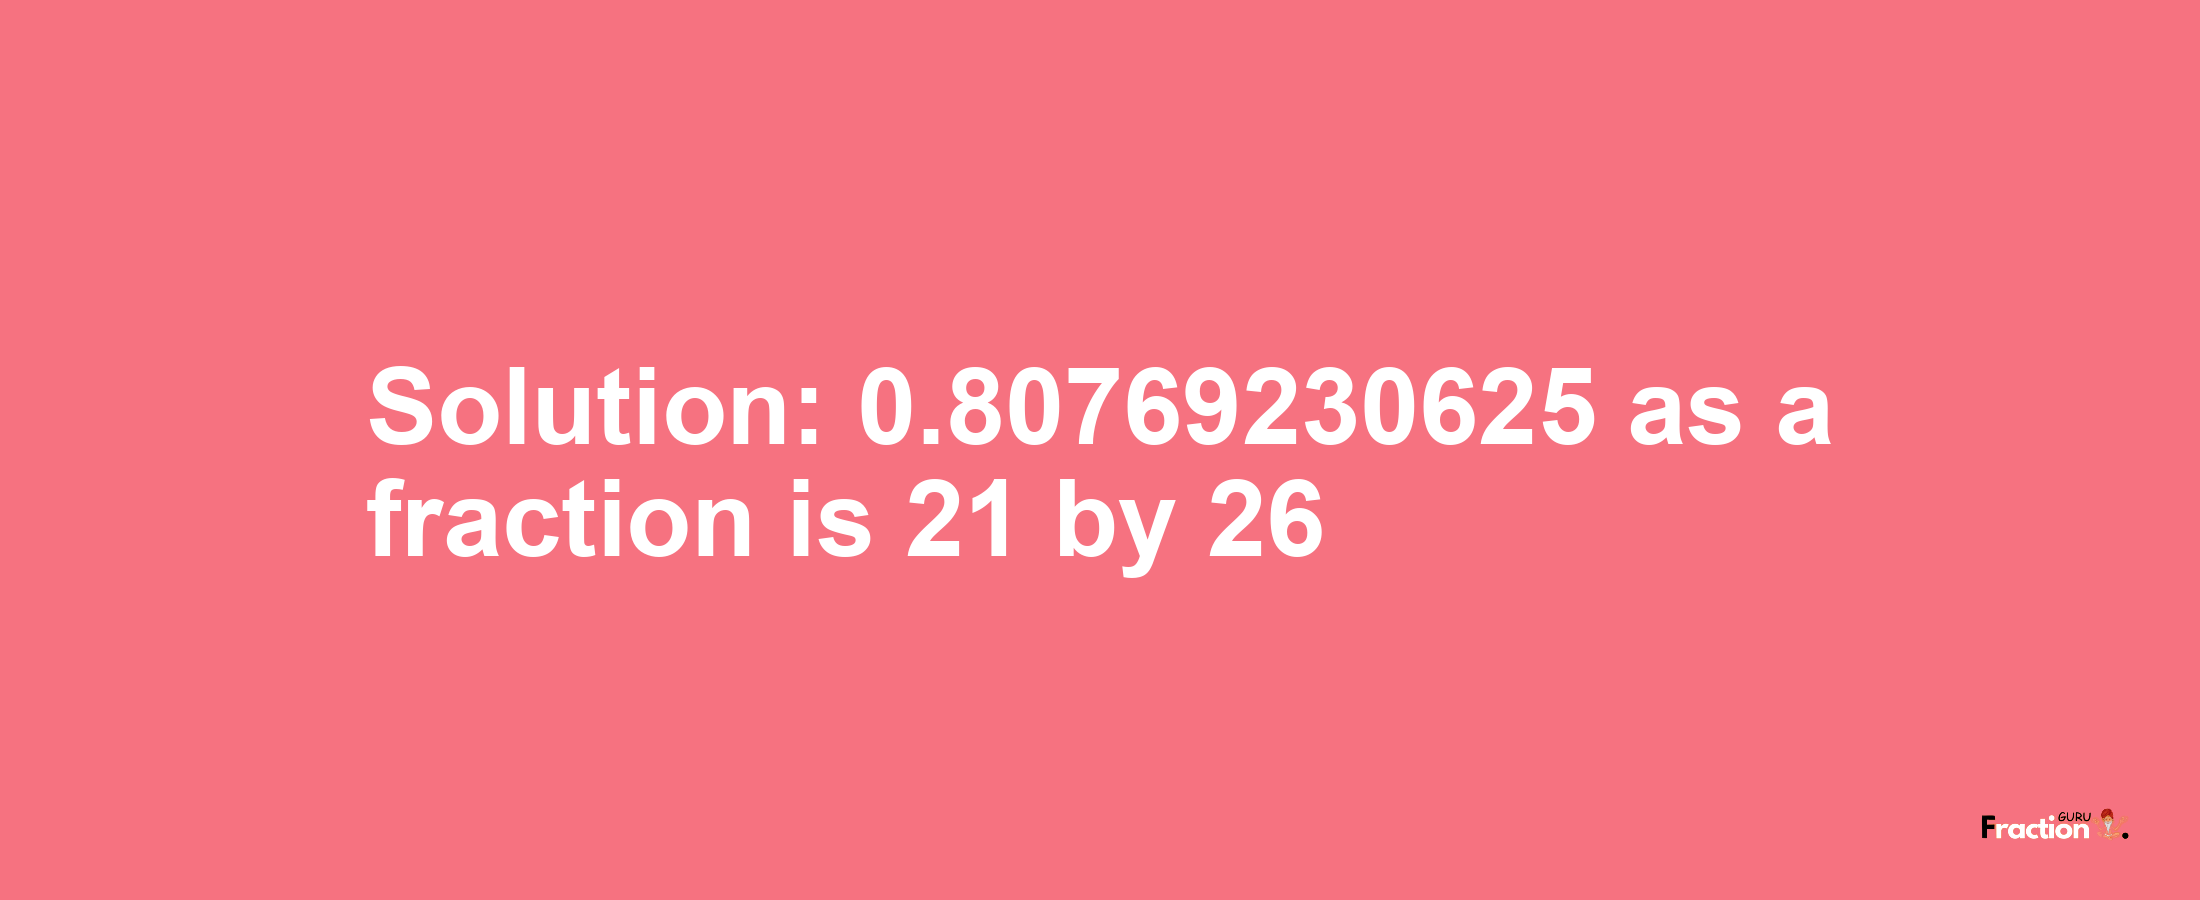 Solution:0.80769230625 as a fraction is 21/26